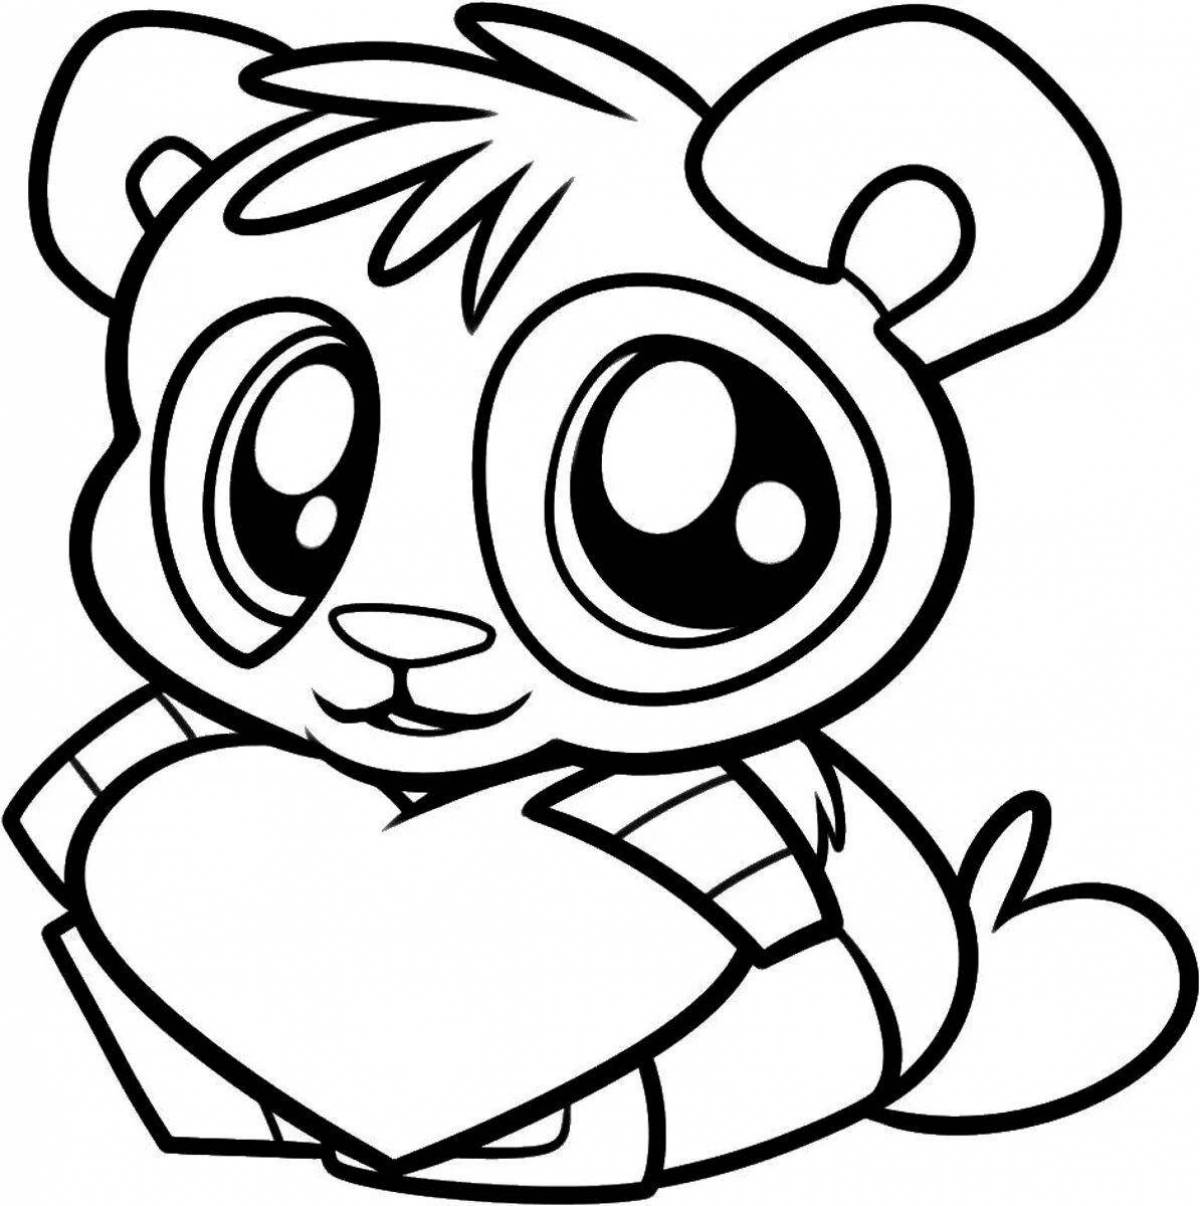 Incredible panda coloring pages for girls